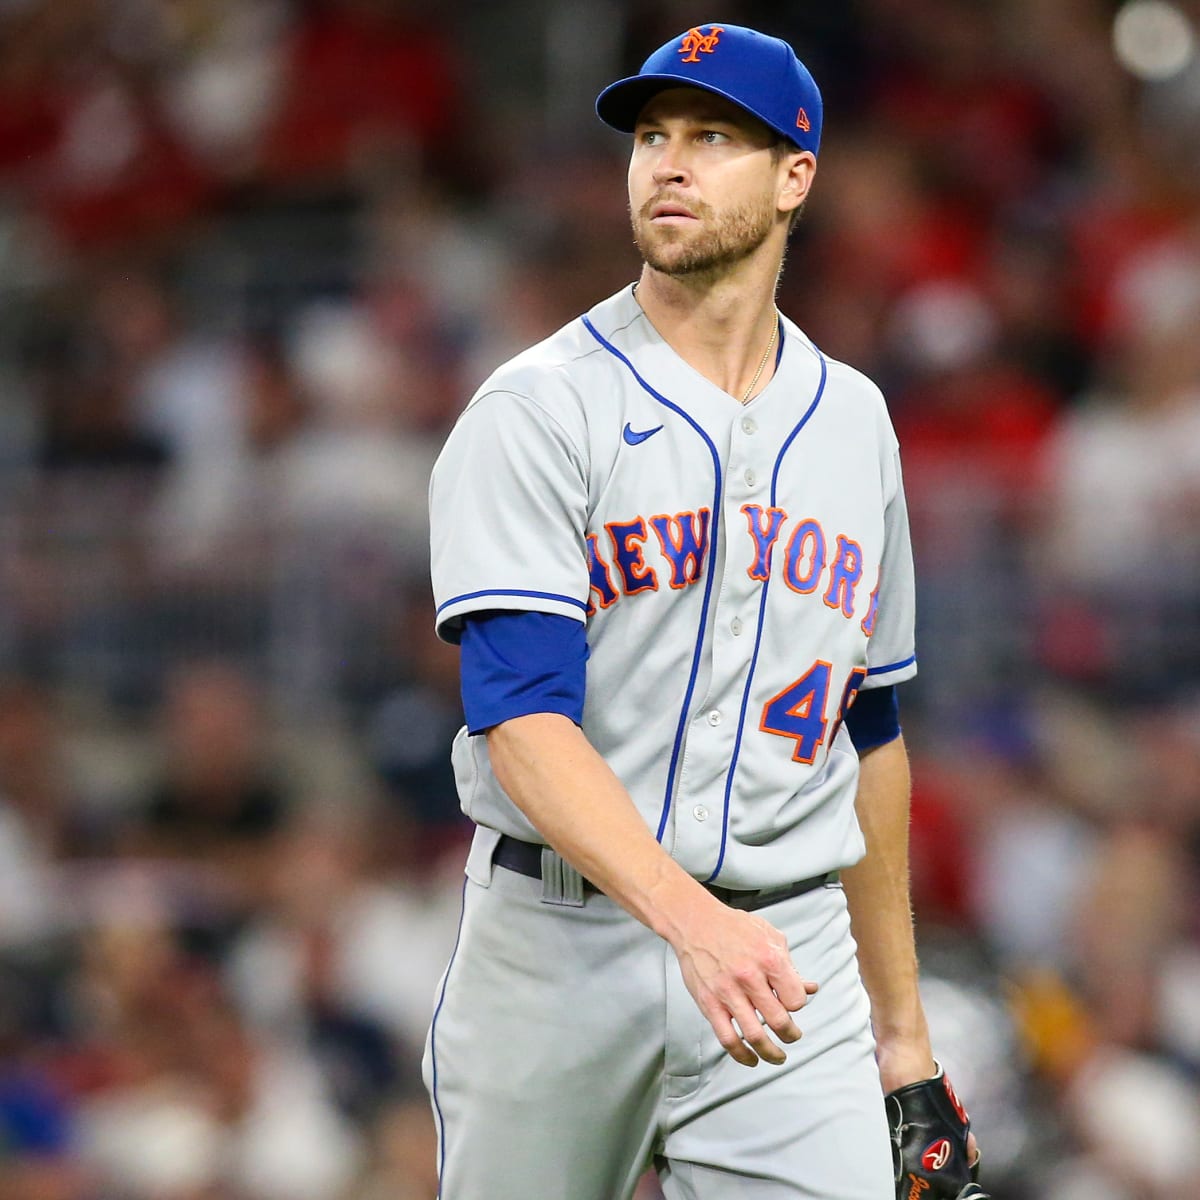 Rangers may not have Jacob deGrom for now, but the AL West is still winnable